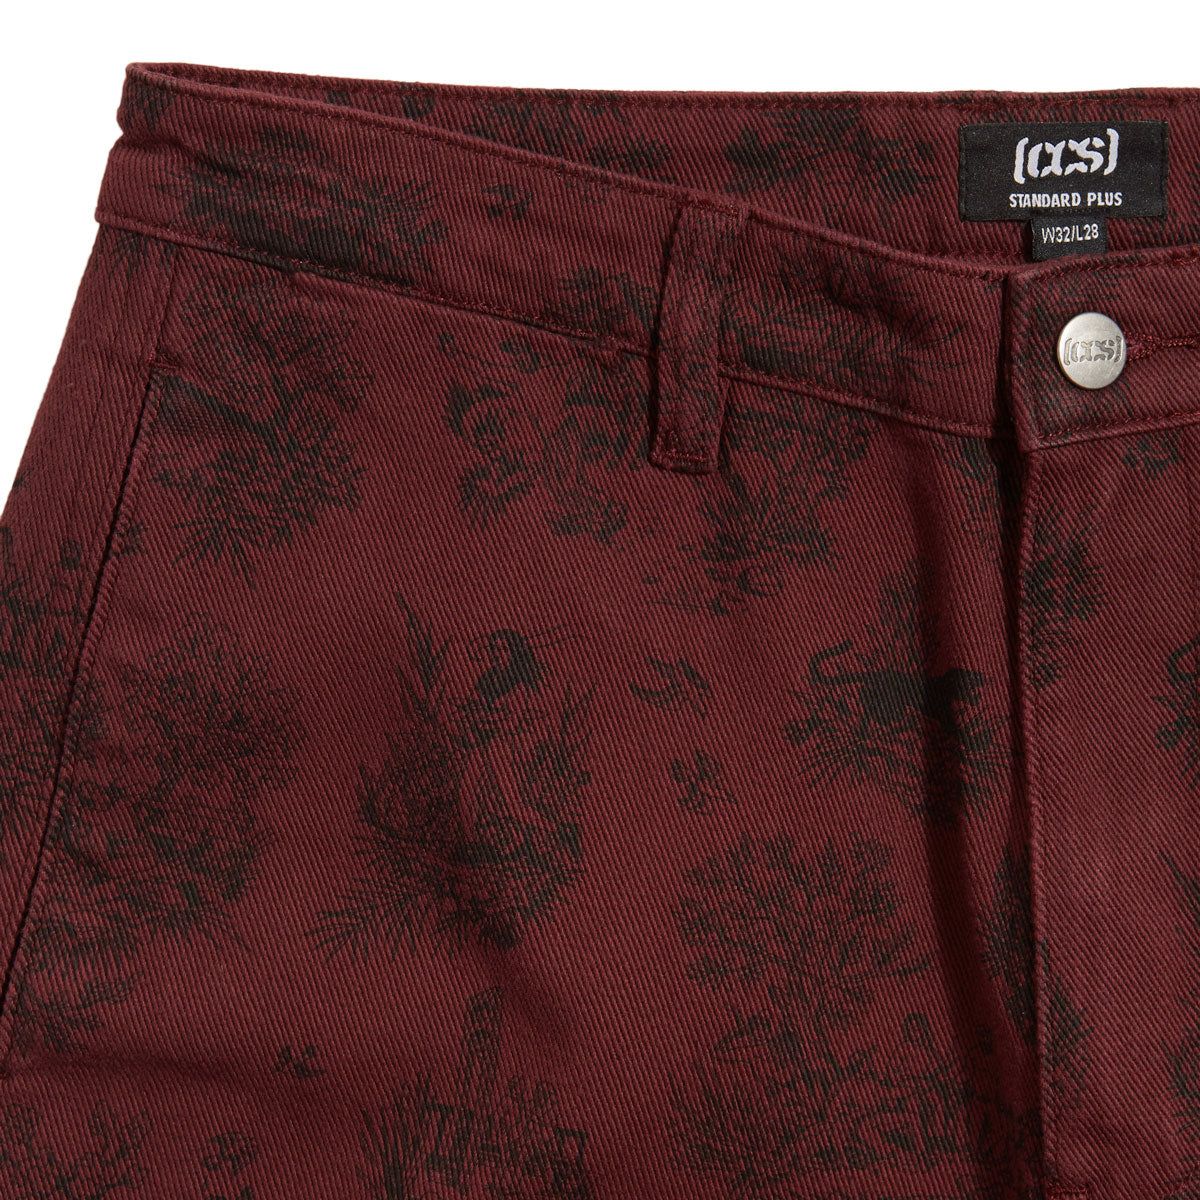 CCS Original Relaxed Toile Chino Pants - Oxblood image 5